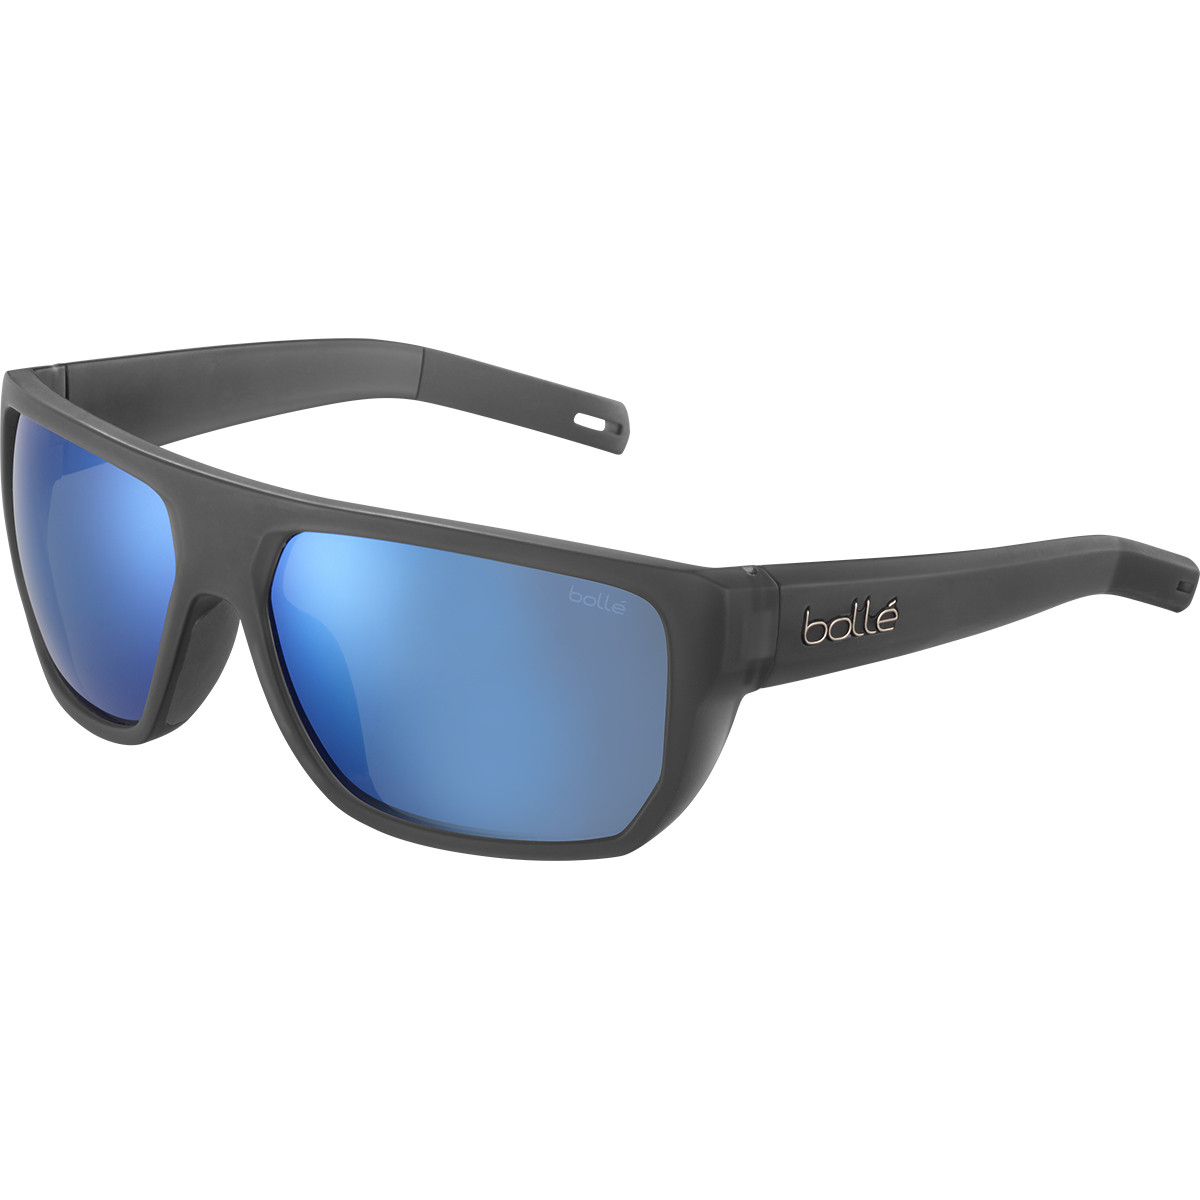 Vulture_Crystal Grey Matte-HD Polarized Offshore Blue-01